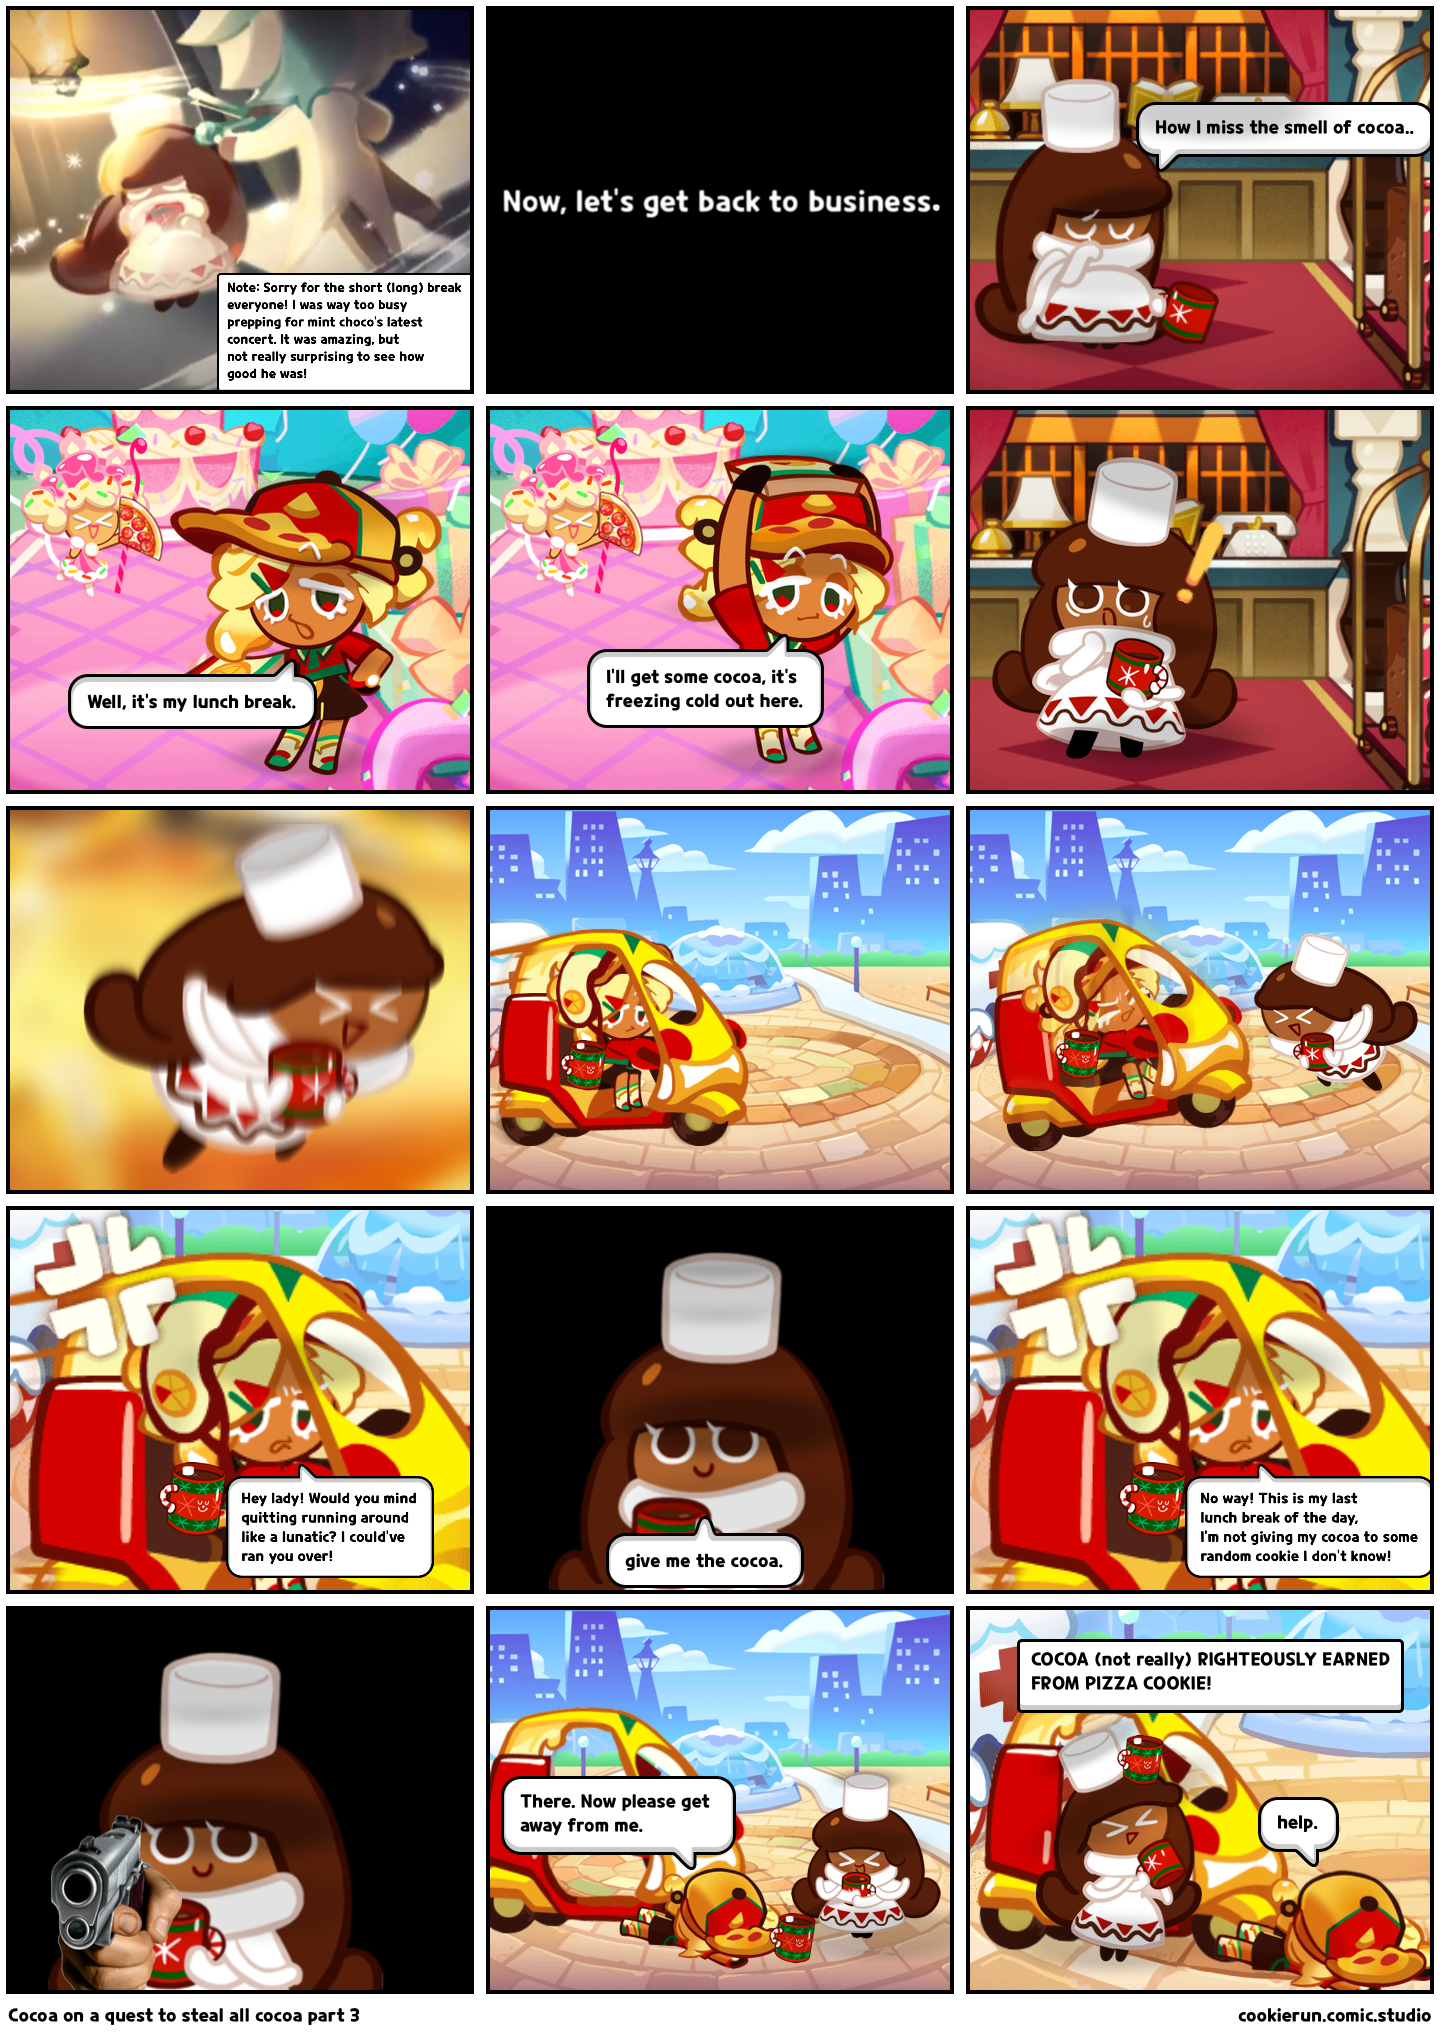 Cocoa on a quest to steal all cocoa part 3